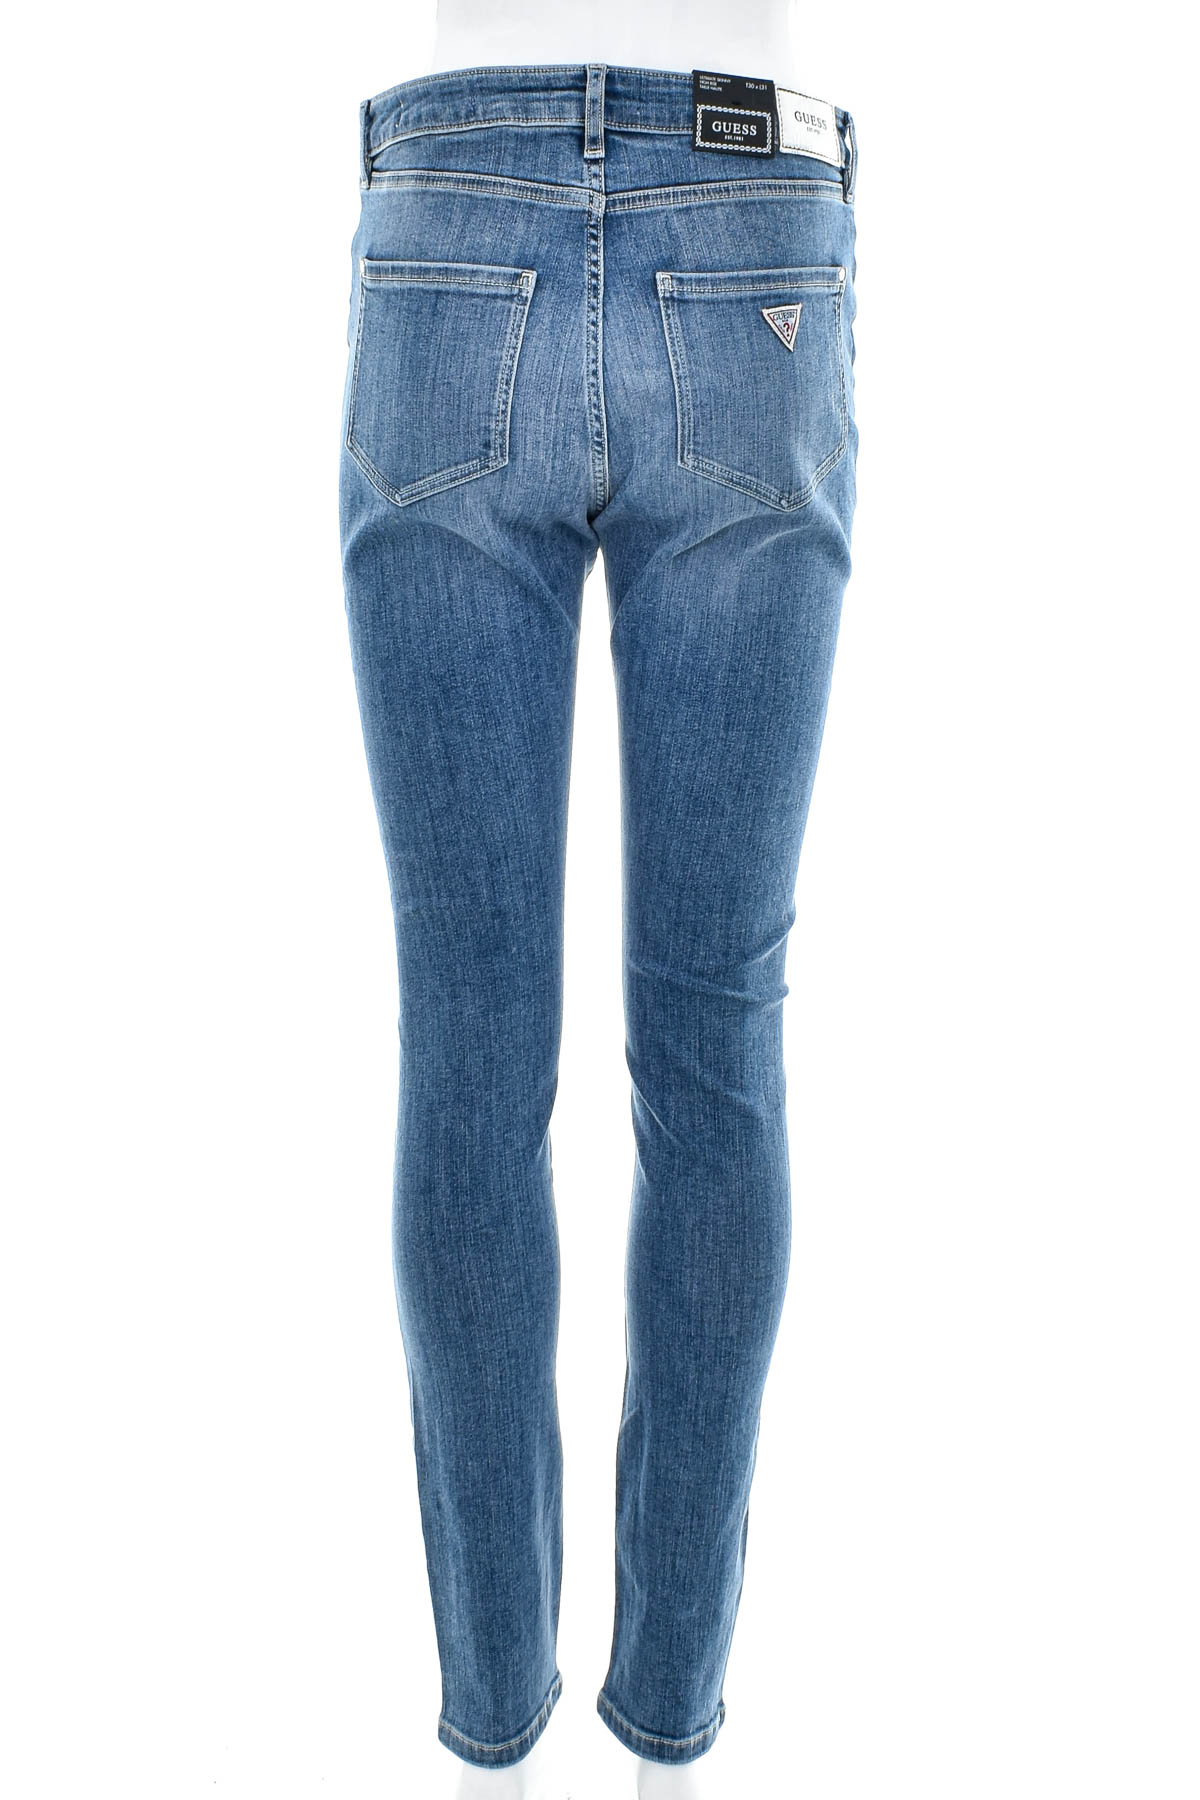 Women's jeans - GUESS - 1